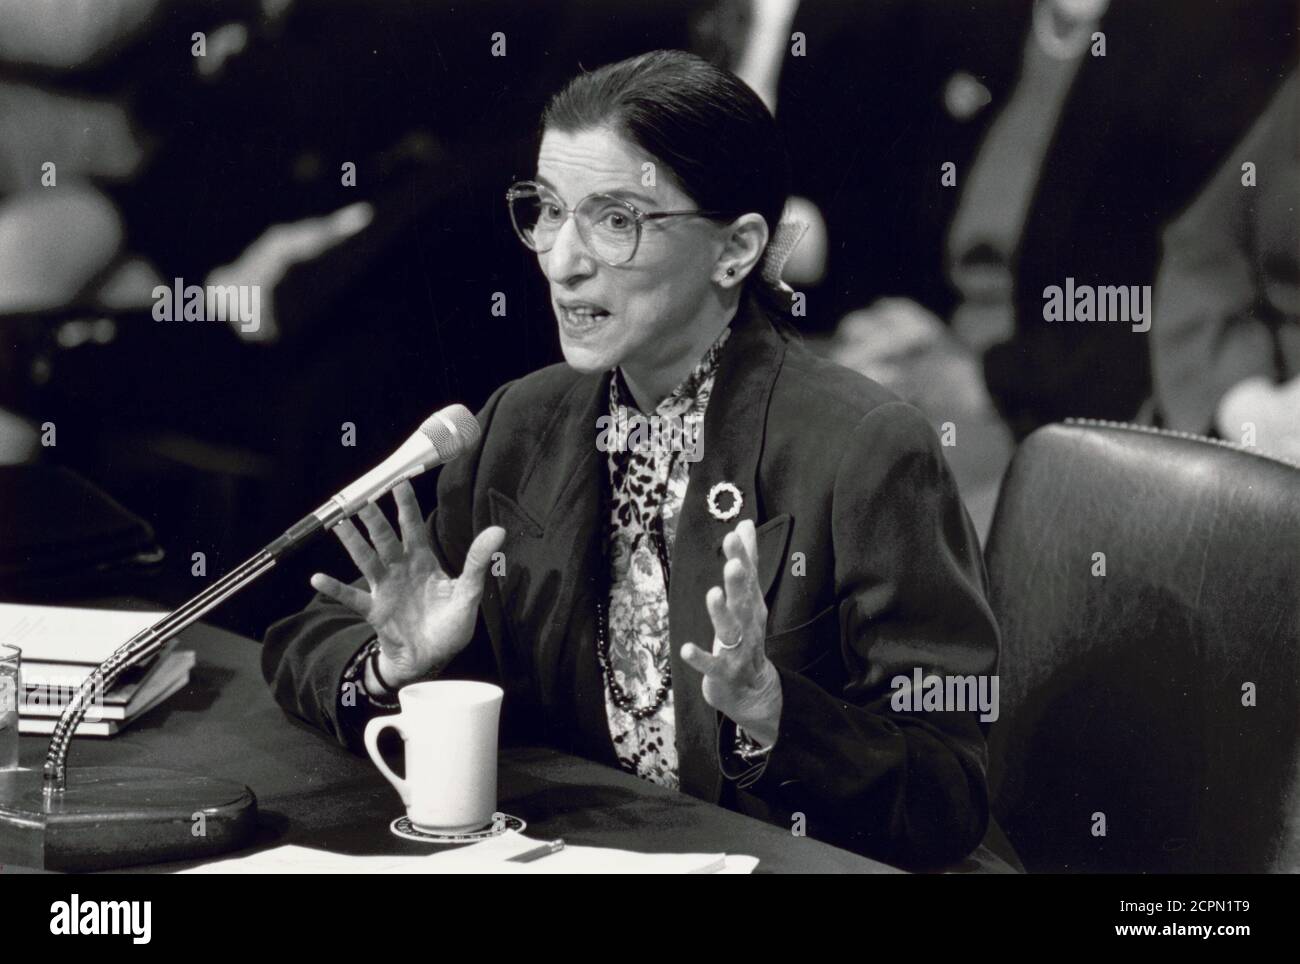 Ruth Bader Ginsburg speaking into microphone before the United States Senate Judiciary Committee hearing for her appointment to the Supreme Court, Washington, DC, 7/20/1993. (Photo by Michael R Jenkins/Congressional Quarterly/RBM Vintage Images) Stock Photo